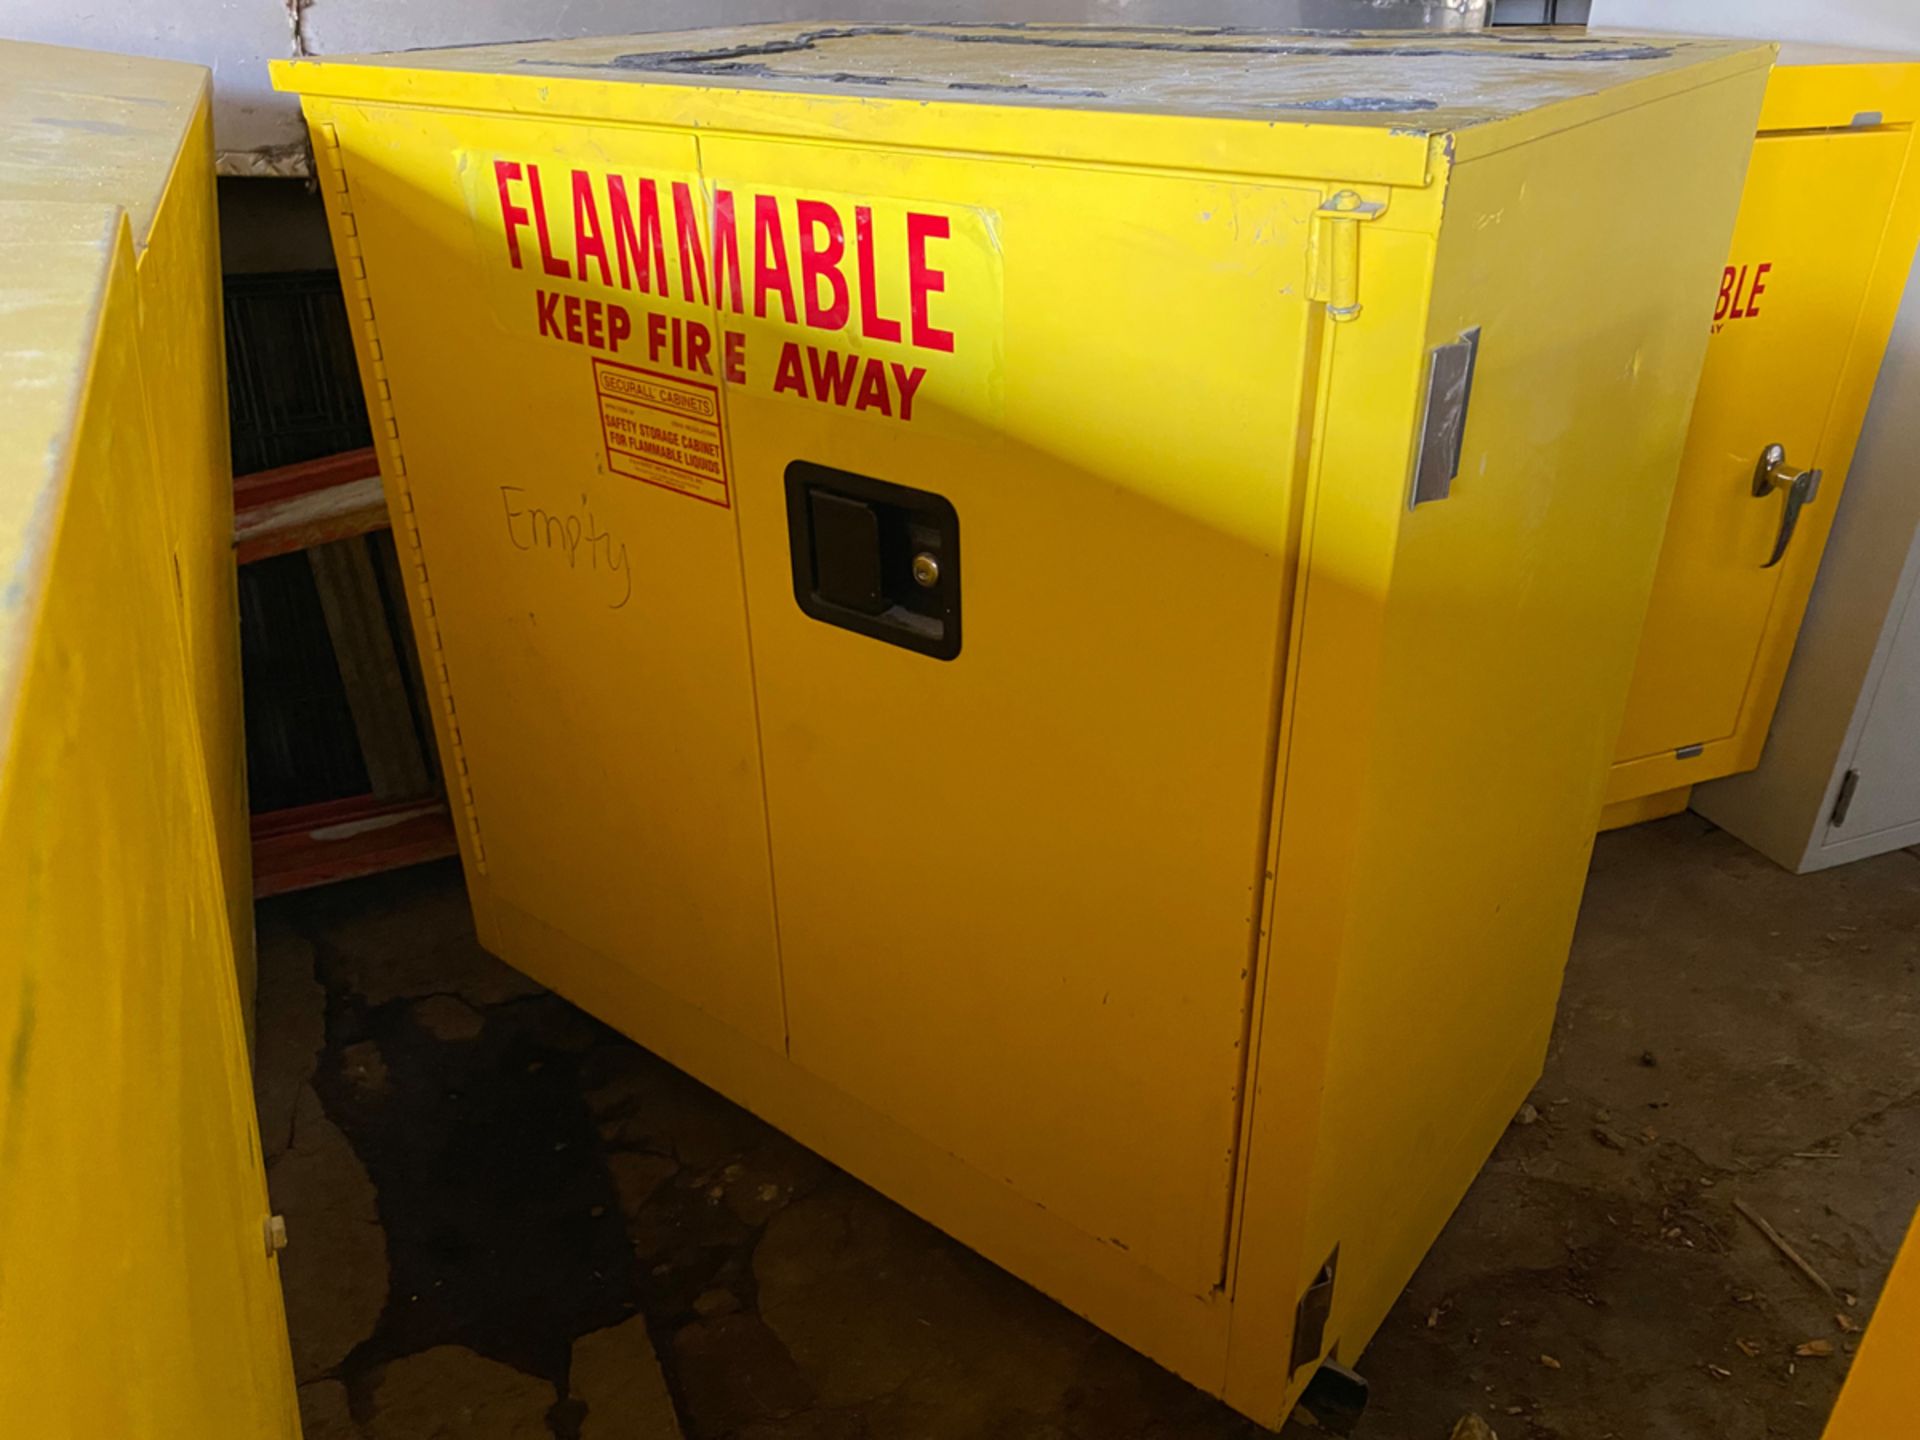 {Each} Flammable Liquid Safety Storage Cabinet